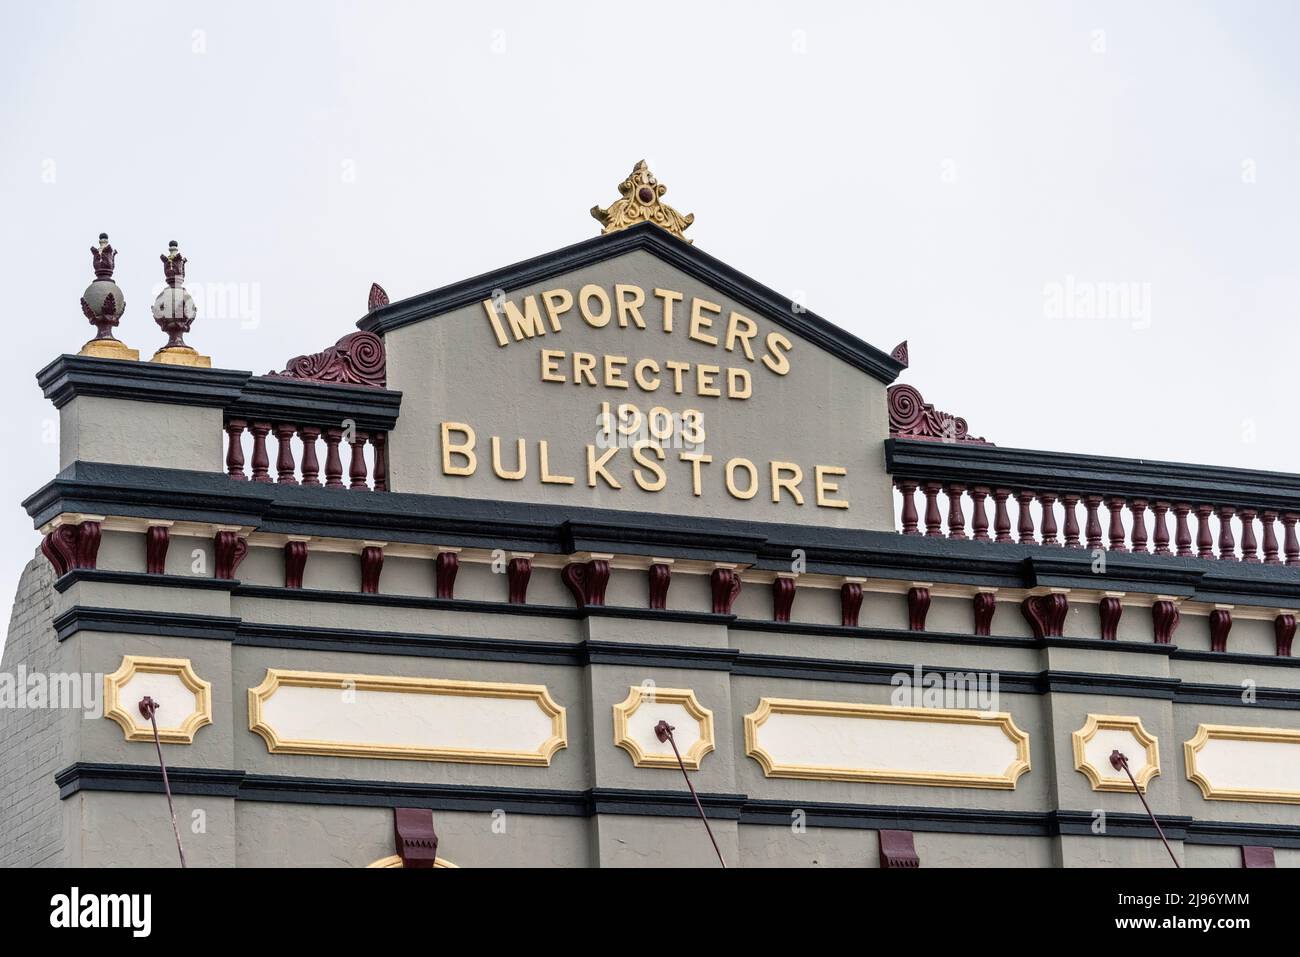 The heritage Kwong Sing building in Glen Innes, new south wales, australia Stock Photo